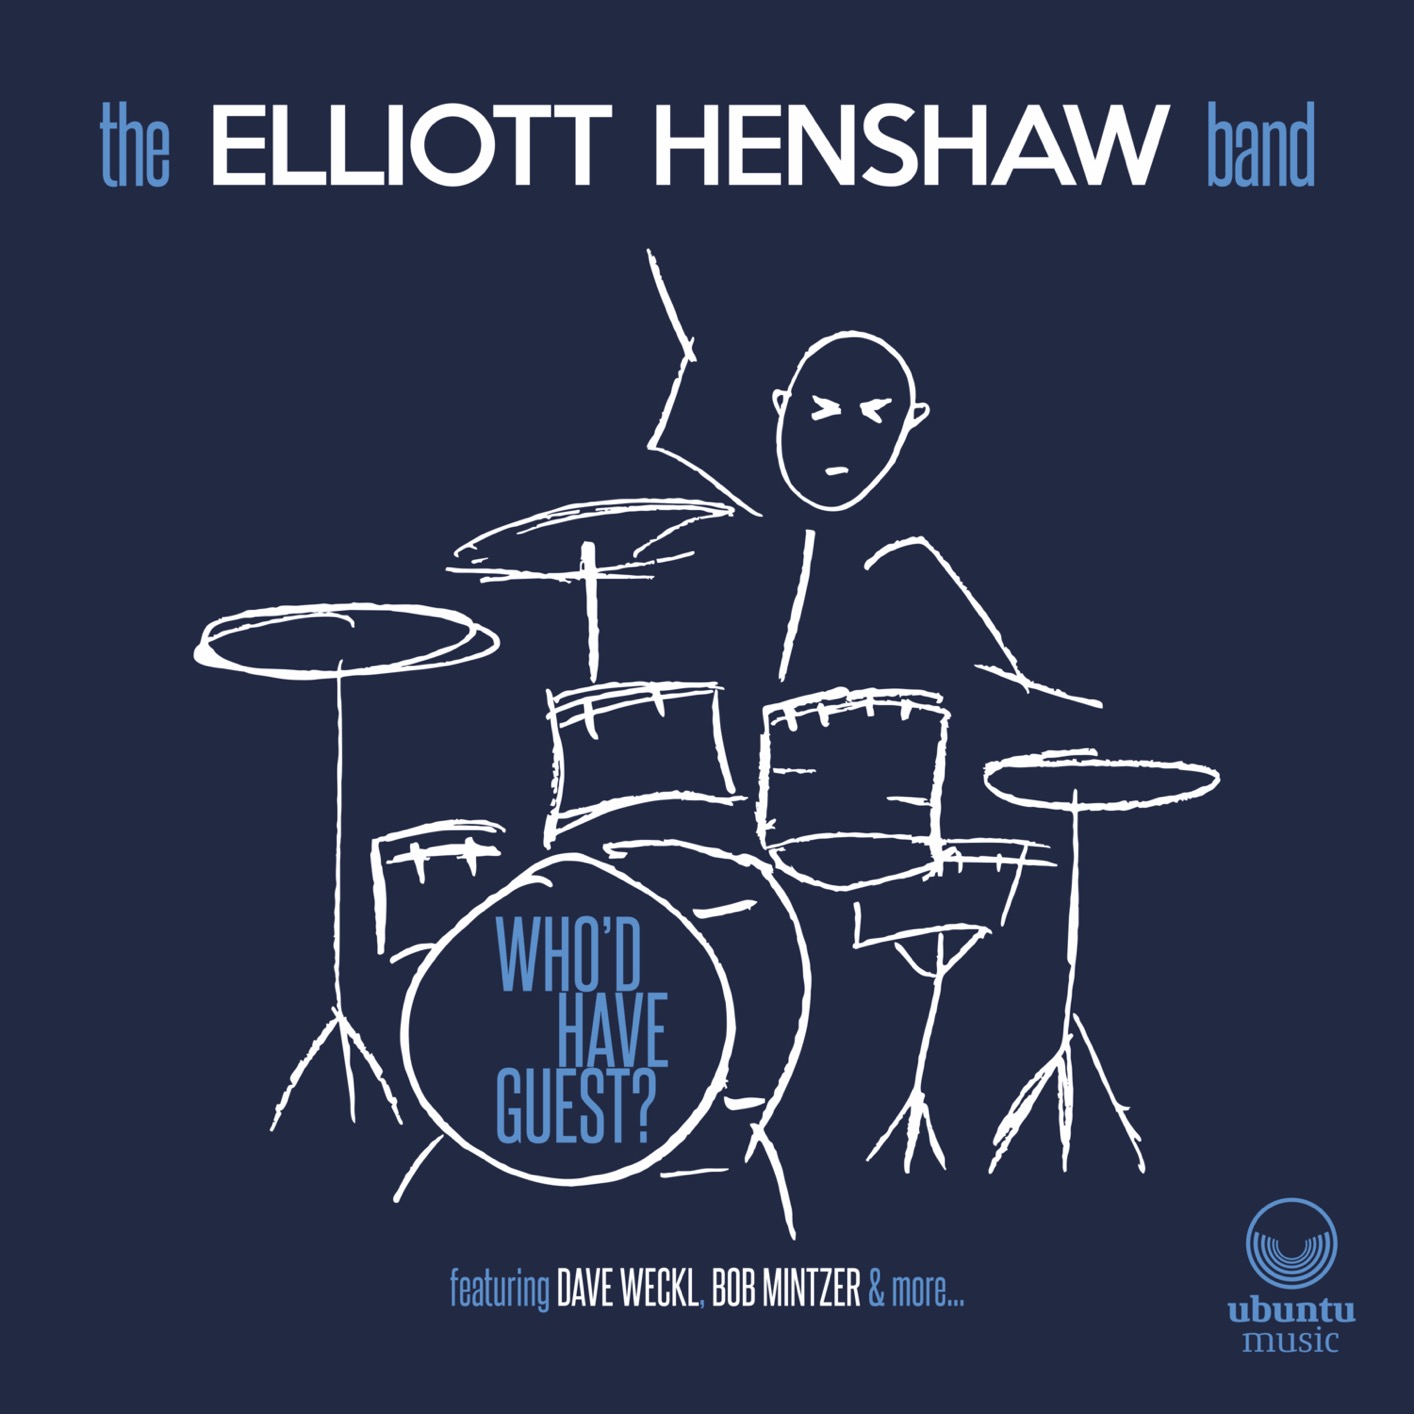 The Elliott Henshaw Band – Who’d Have Guest? (2021) [FLAC 24bit/48kHz]